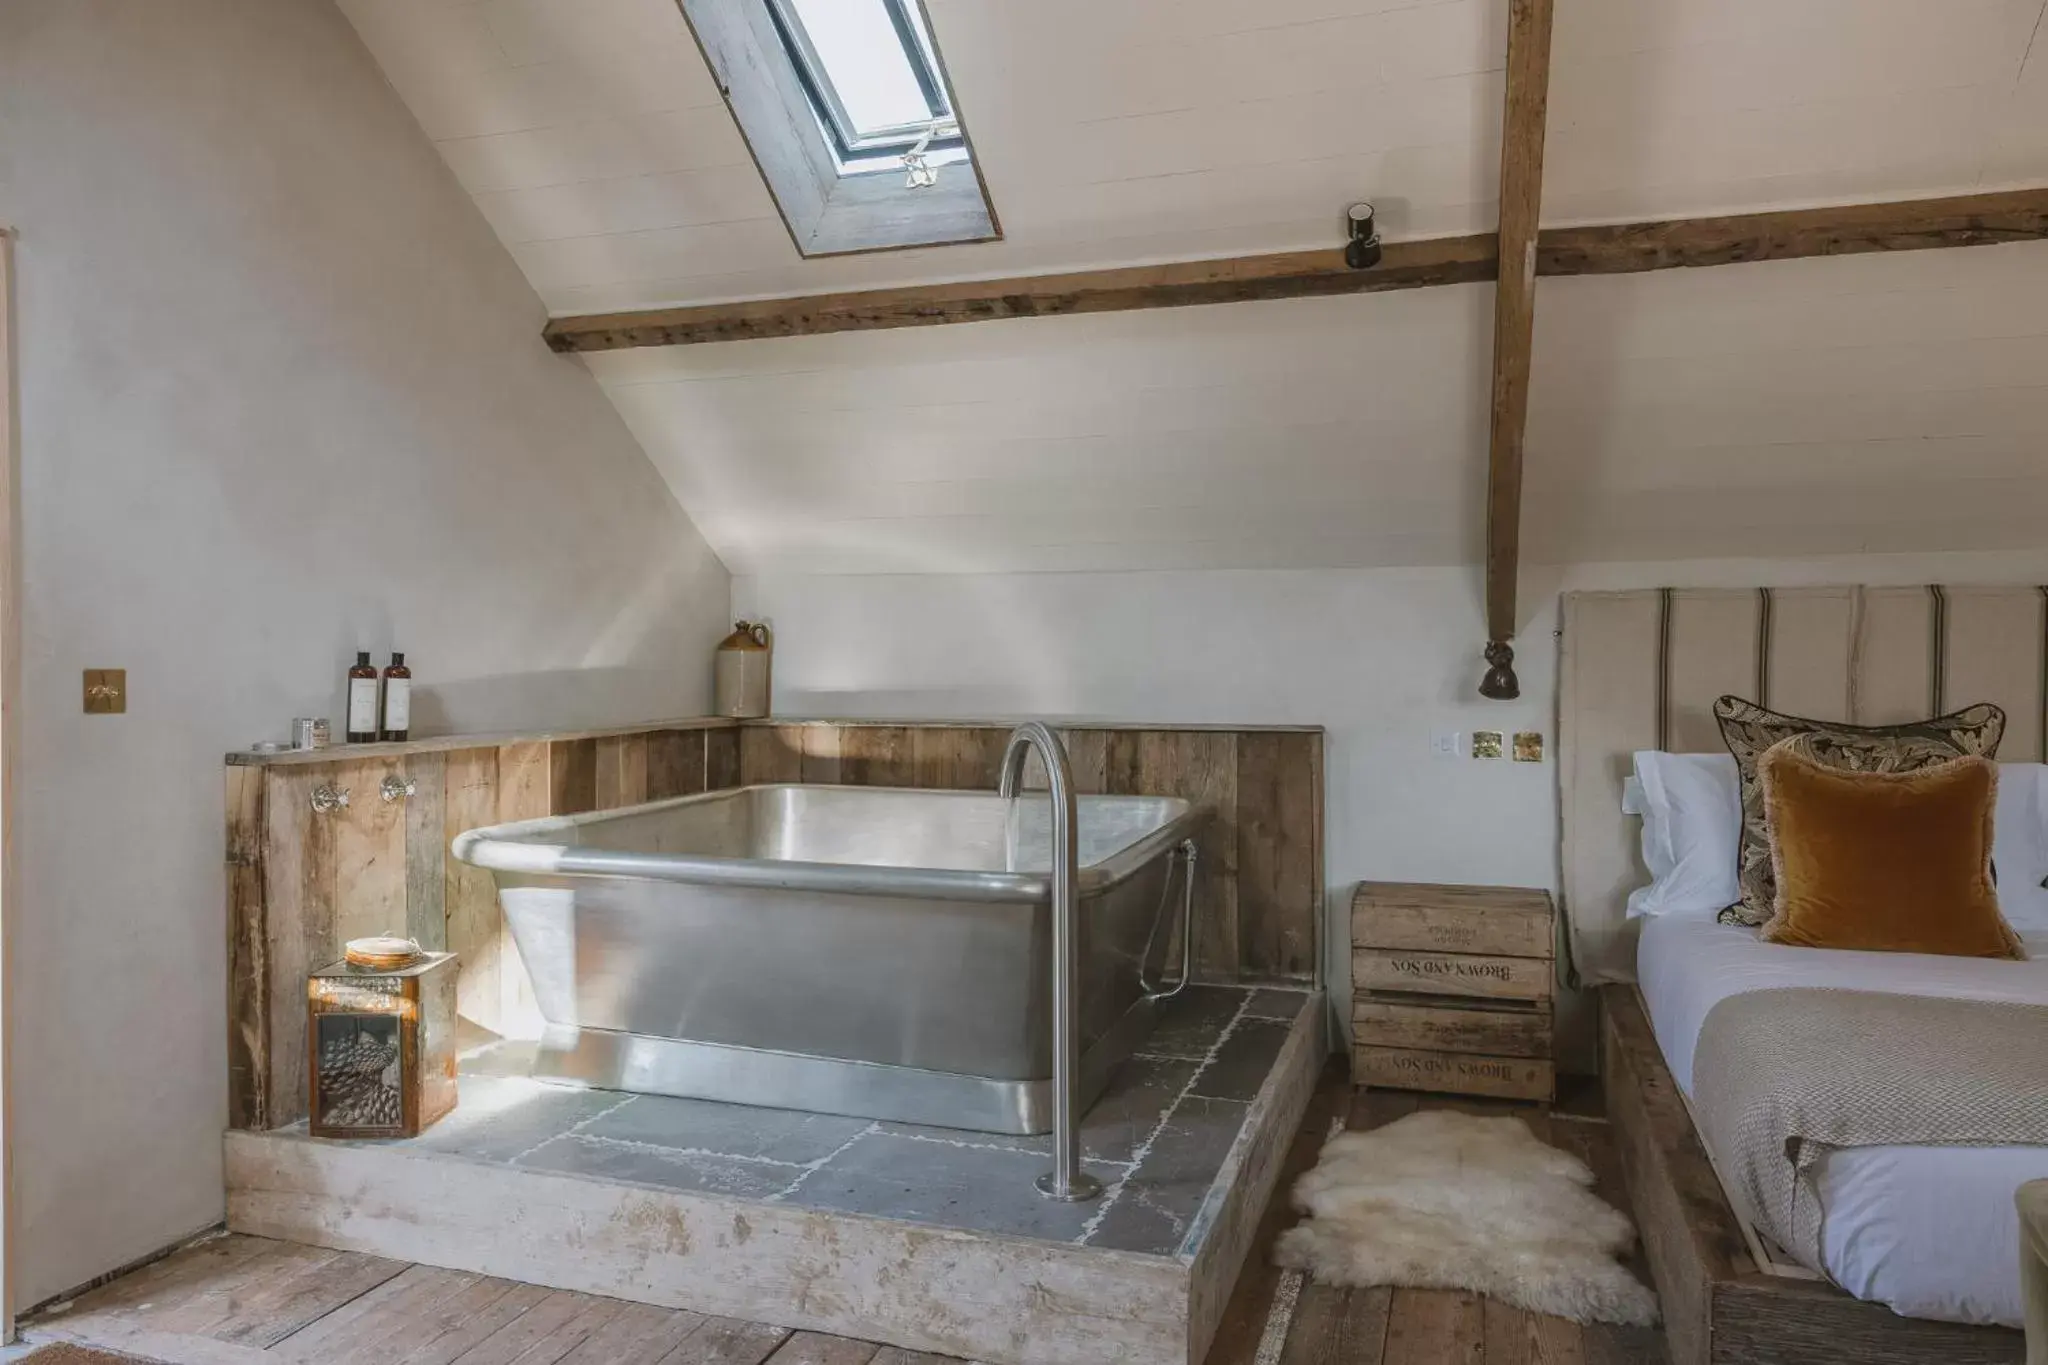 Hot Tub in Outbuildings Dorset